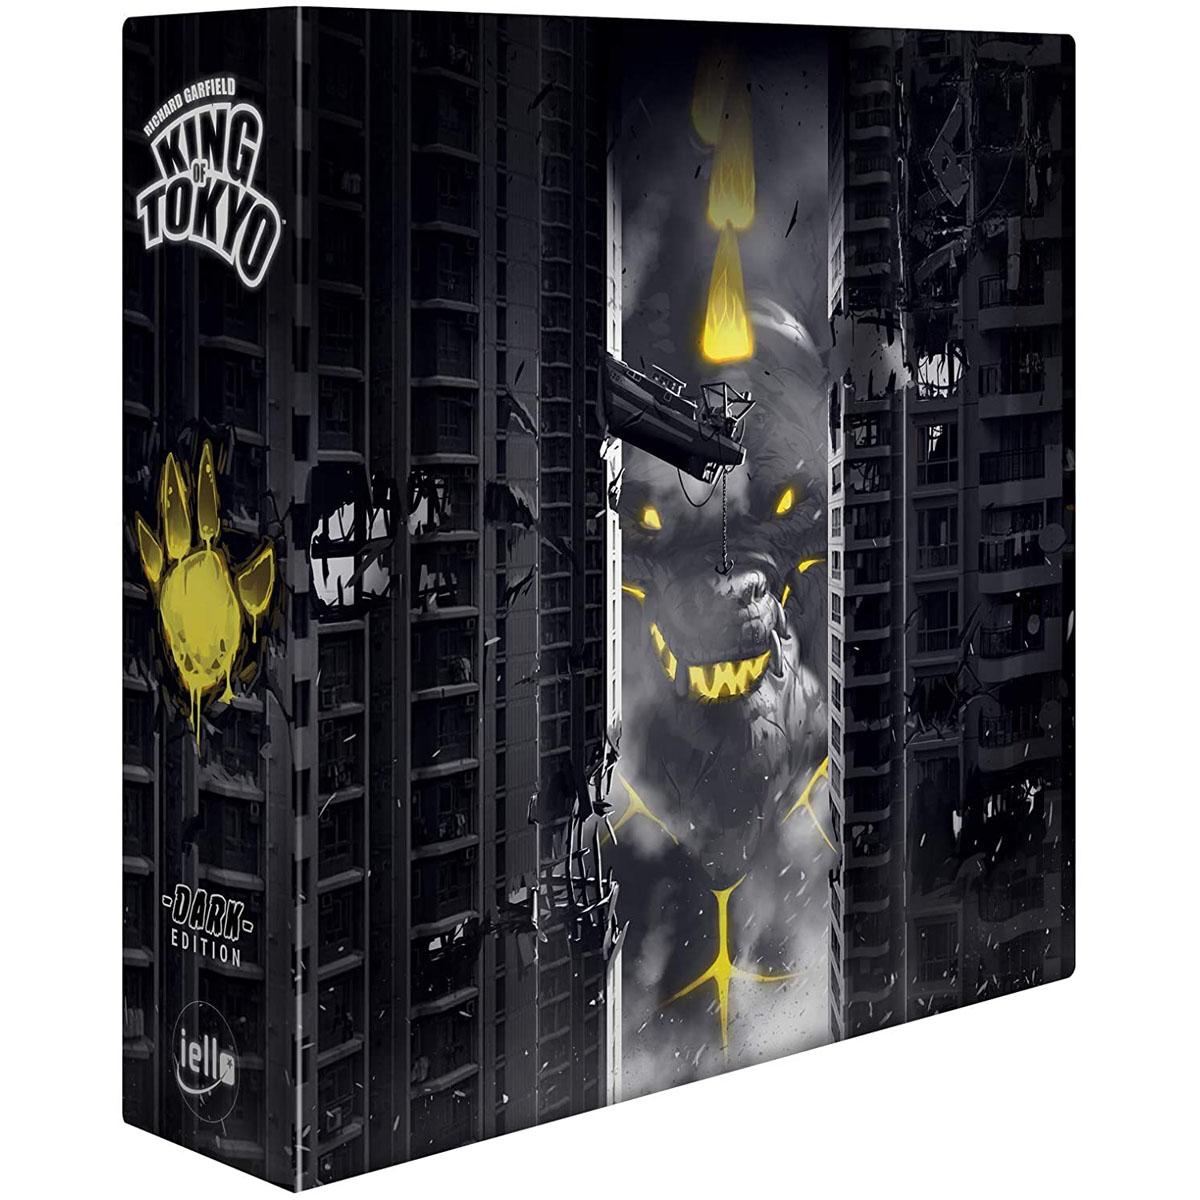 King of Tokyo Dark Limited Edition Board Game by Iello for $29.99 Shipped